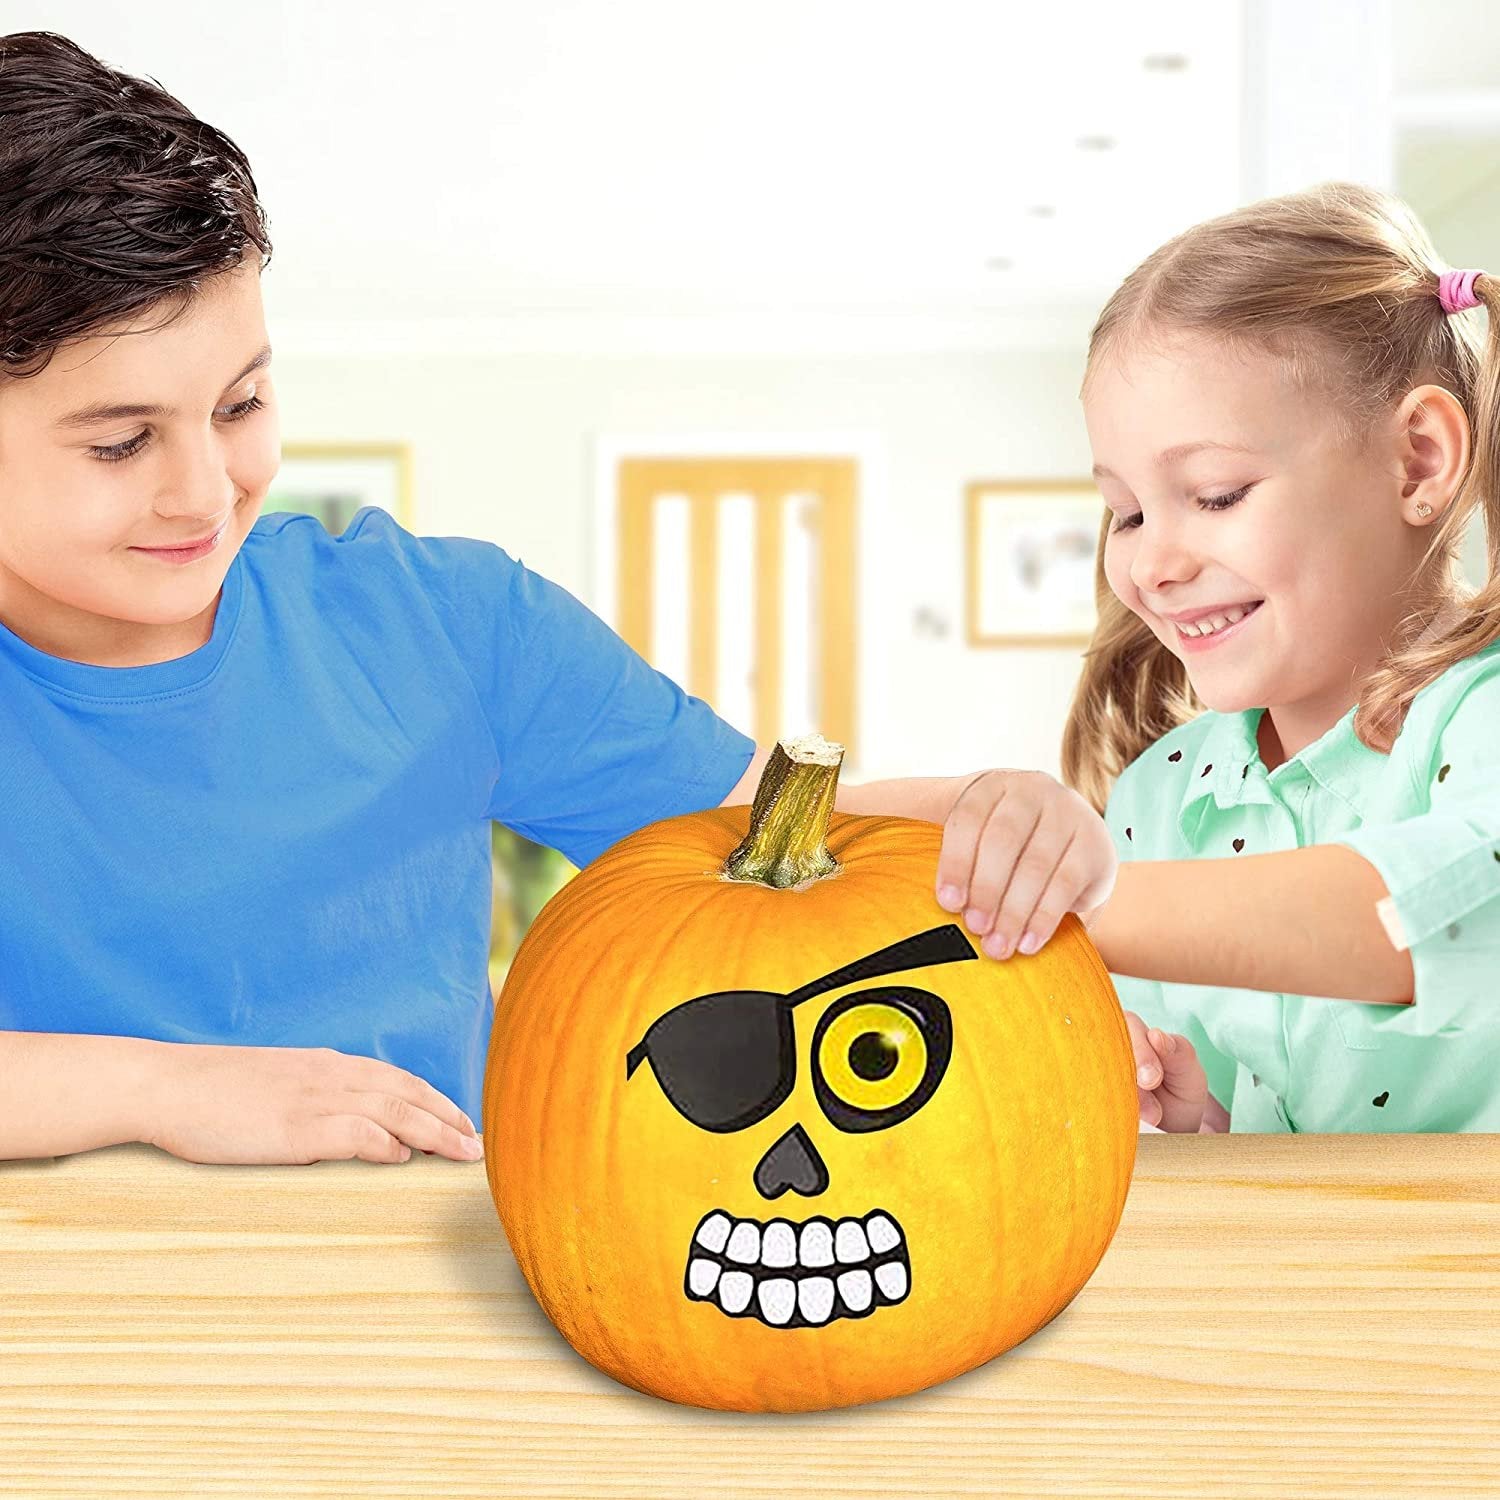 Halloween Pumpkin Decorating Stickers - 24 Large Sheets - Jack-o-Lantern Decoration Kit - 52 Total Face Stickers - Cute Halloween Decor Idea - Treats, Gifts, and Crafts for Kids- 6" x 9"